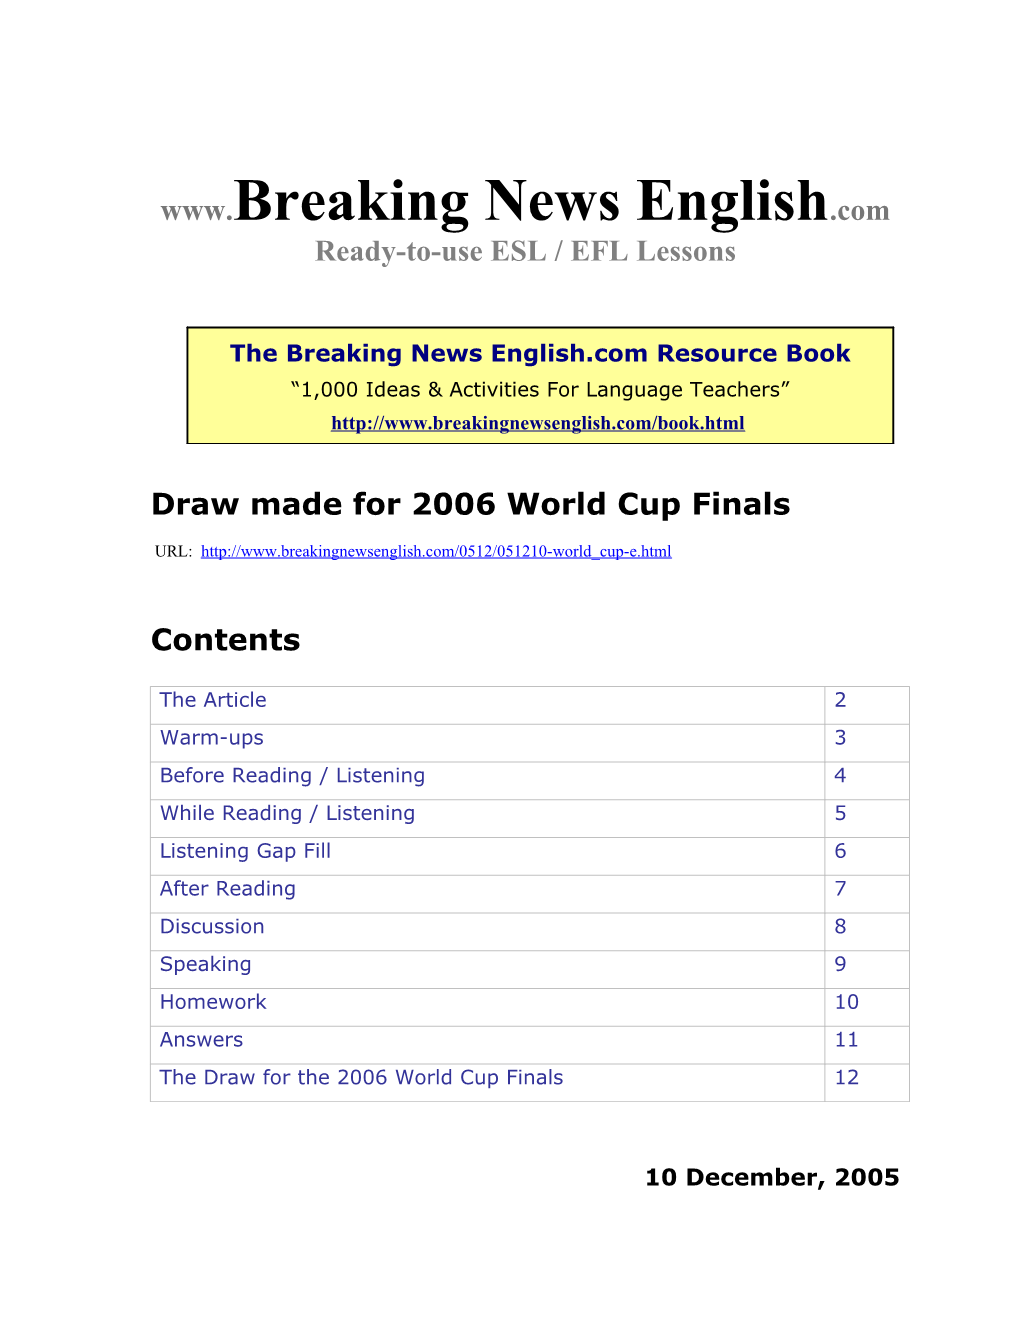 Draw Made for 2006 World Cup Finals